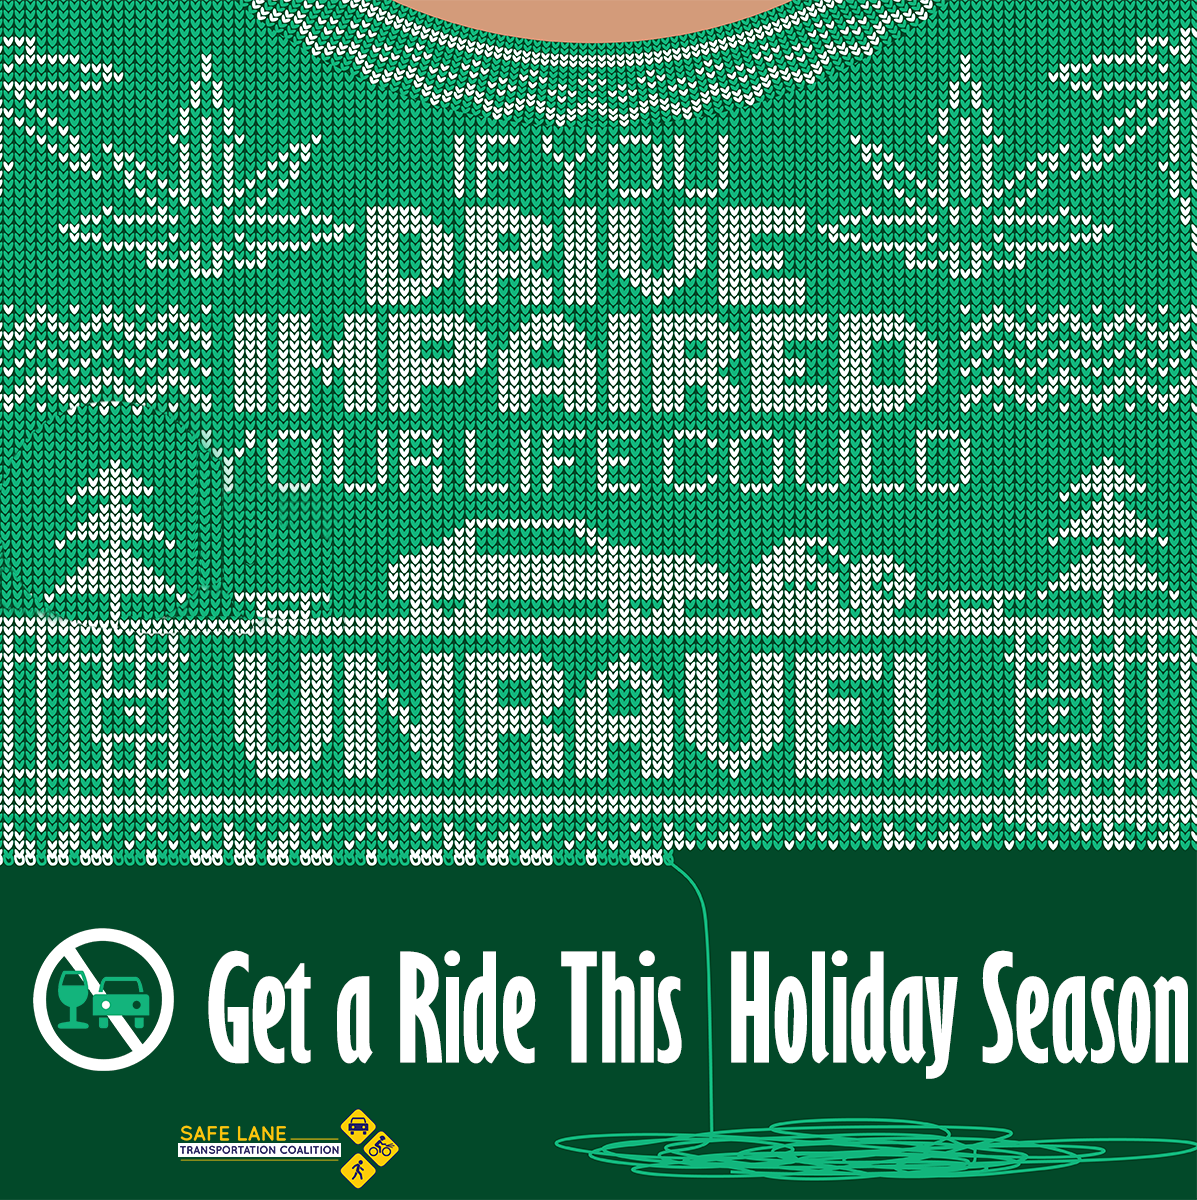 Office of Highway Safety Reminds Kentucky Drivers to Plan Safe Rides this  Holiday Season